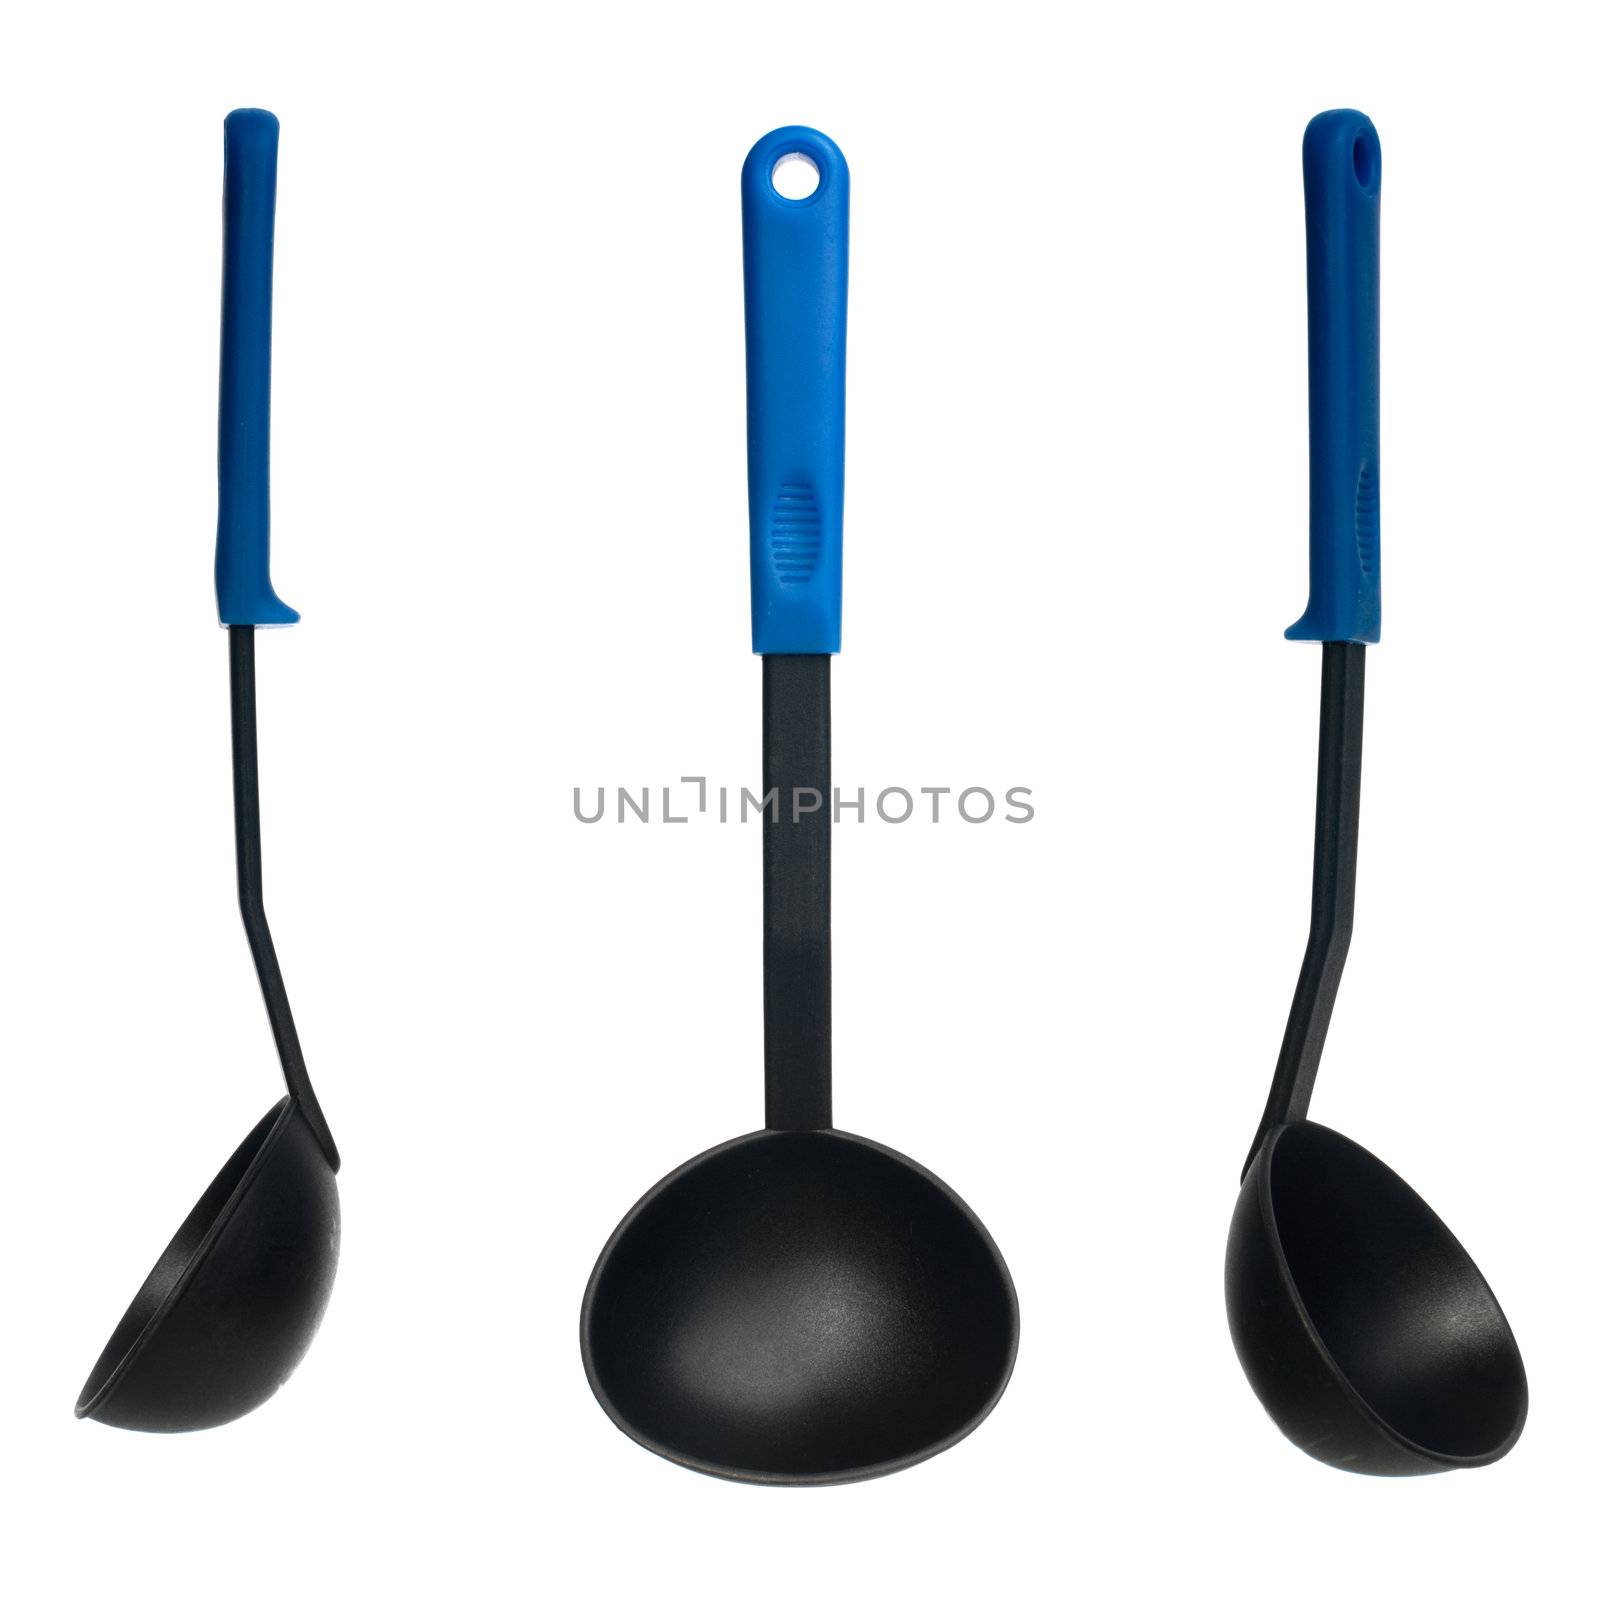 Plastic soup ladle isolated over a white background.